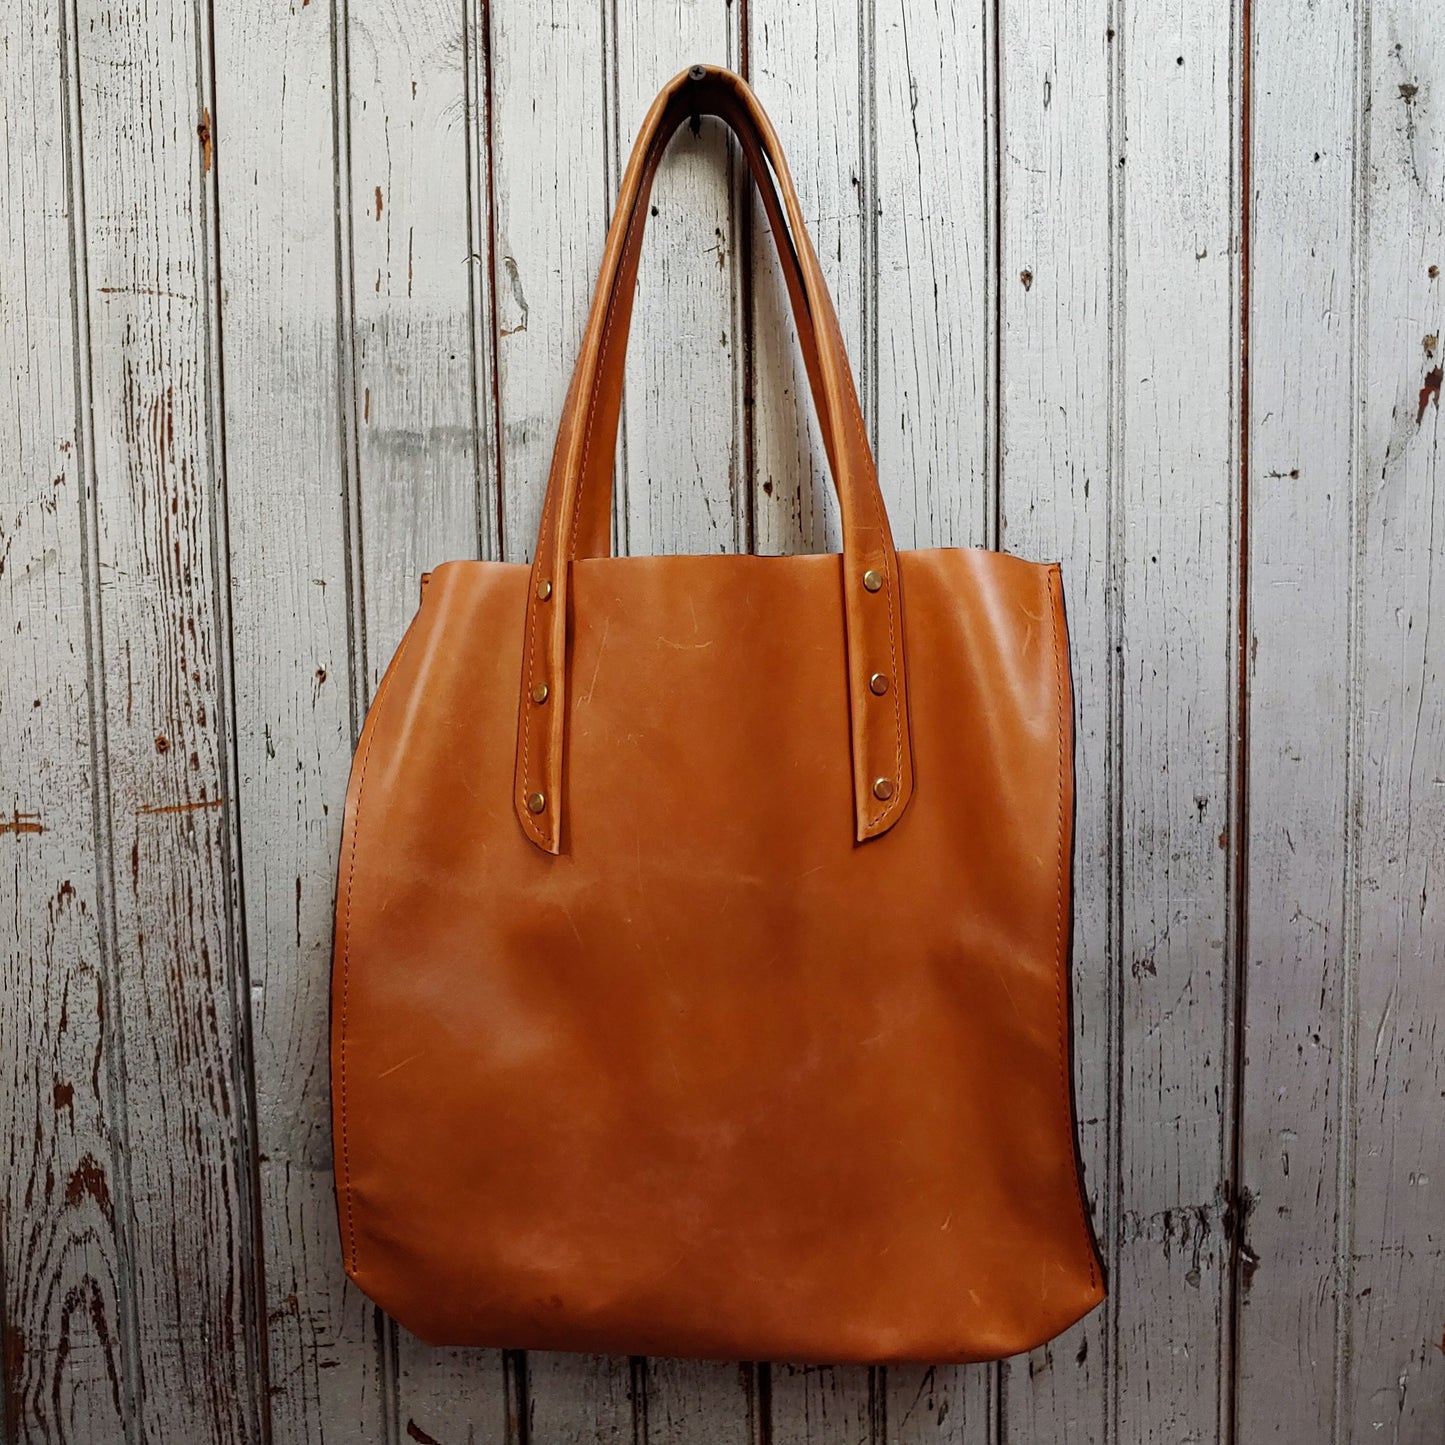 Front facing view of "large leather tote" in camel against a wood paneled background.